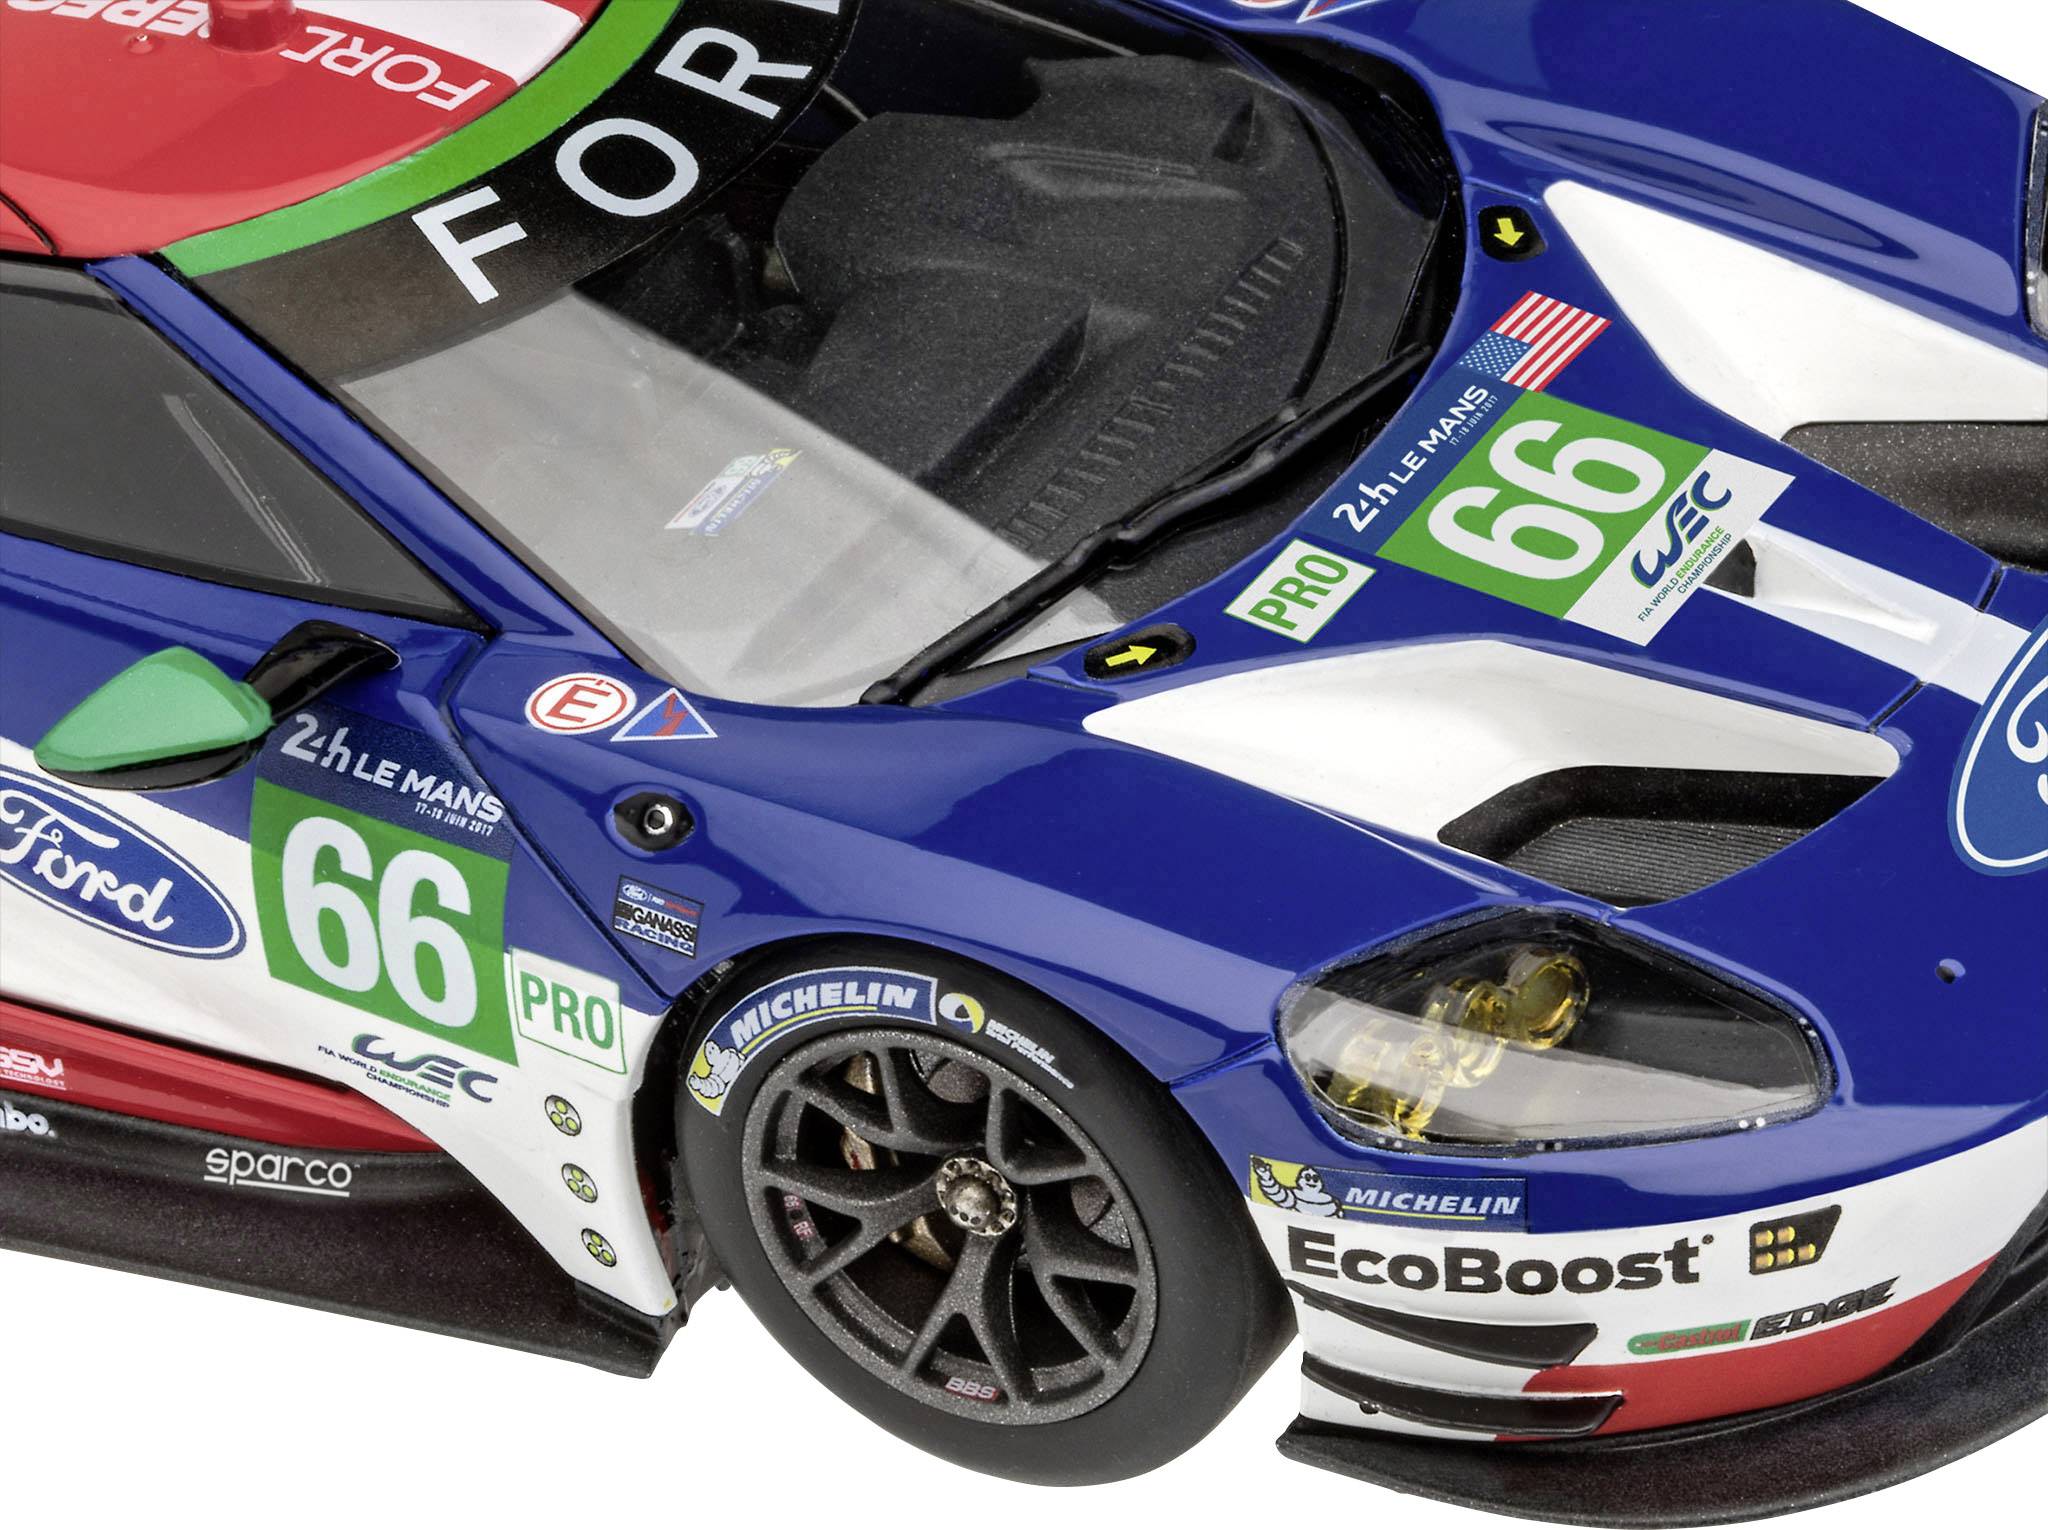 Ford GT Le Mans 2017 1:24 Scale - Loaded Dice Barry Vale of Glamorgan CF64 3HD